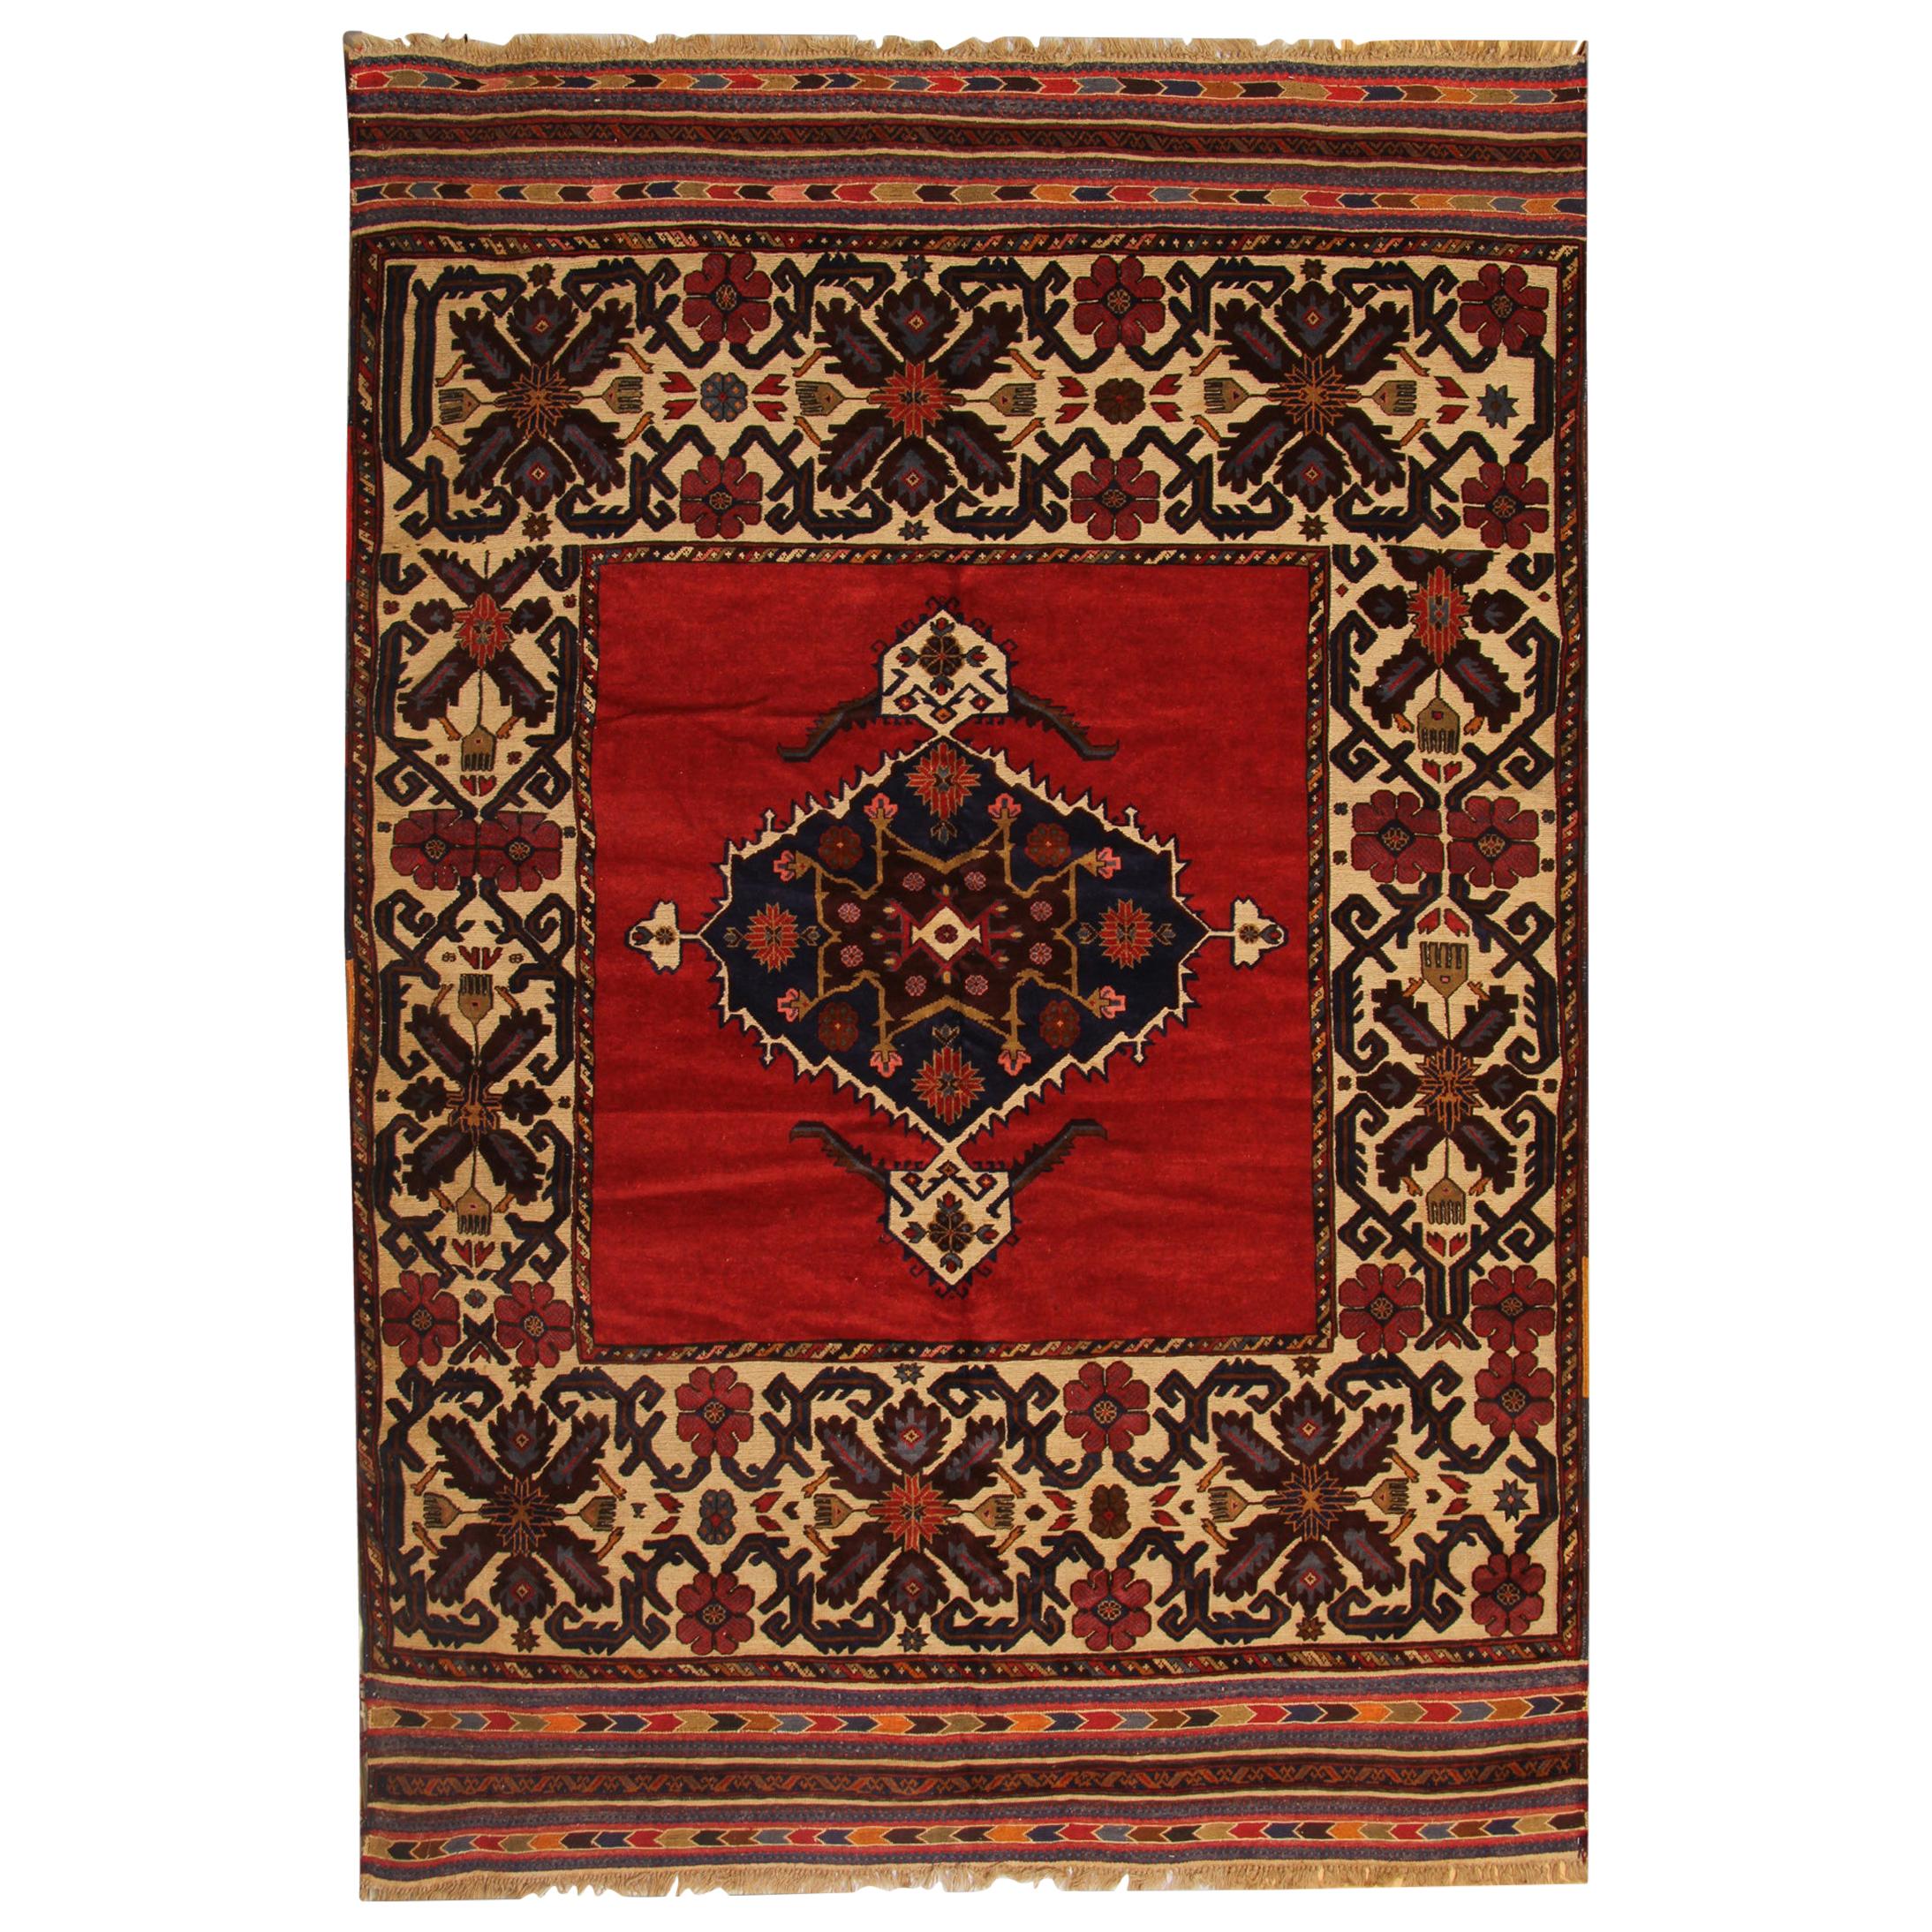 Antique Handwoven Carpet Afghan Red Wool Area Rug for Interior For Sale